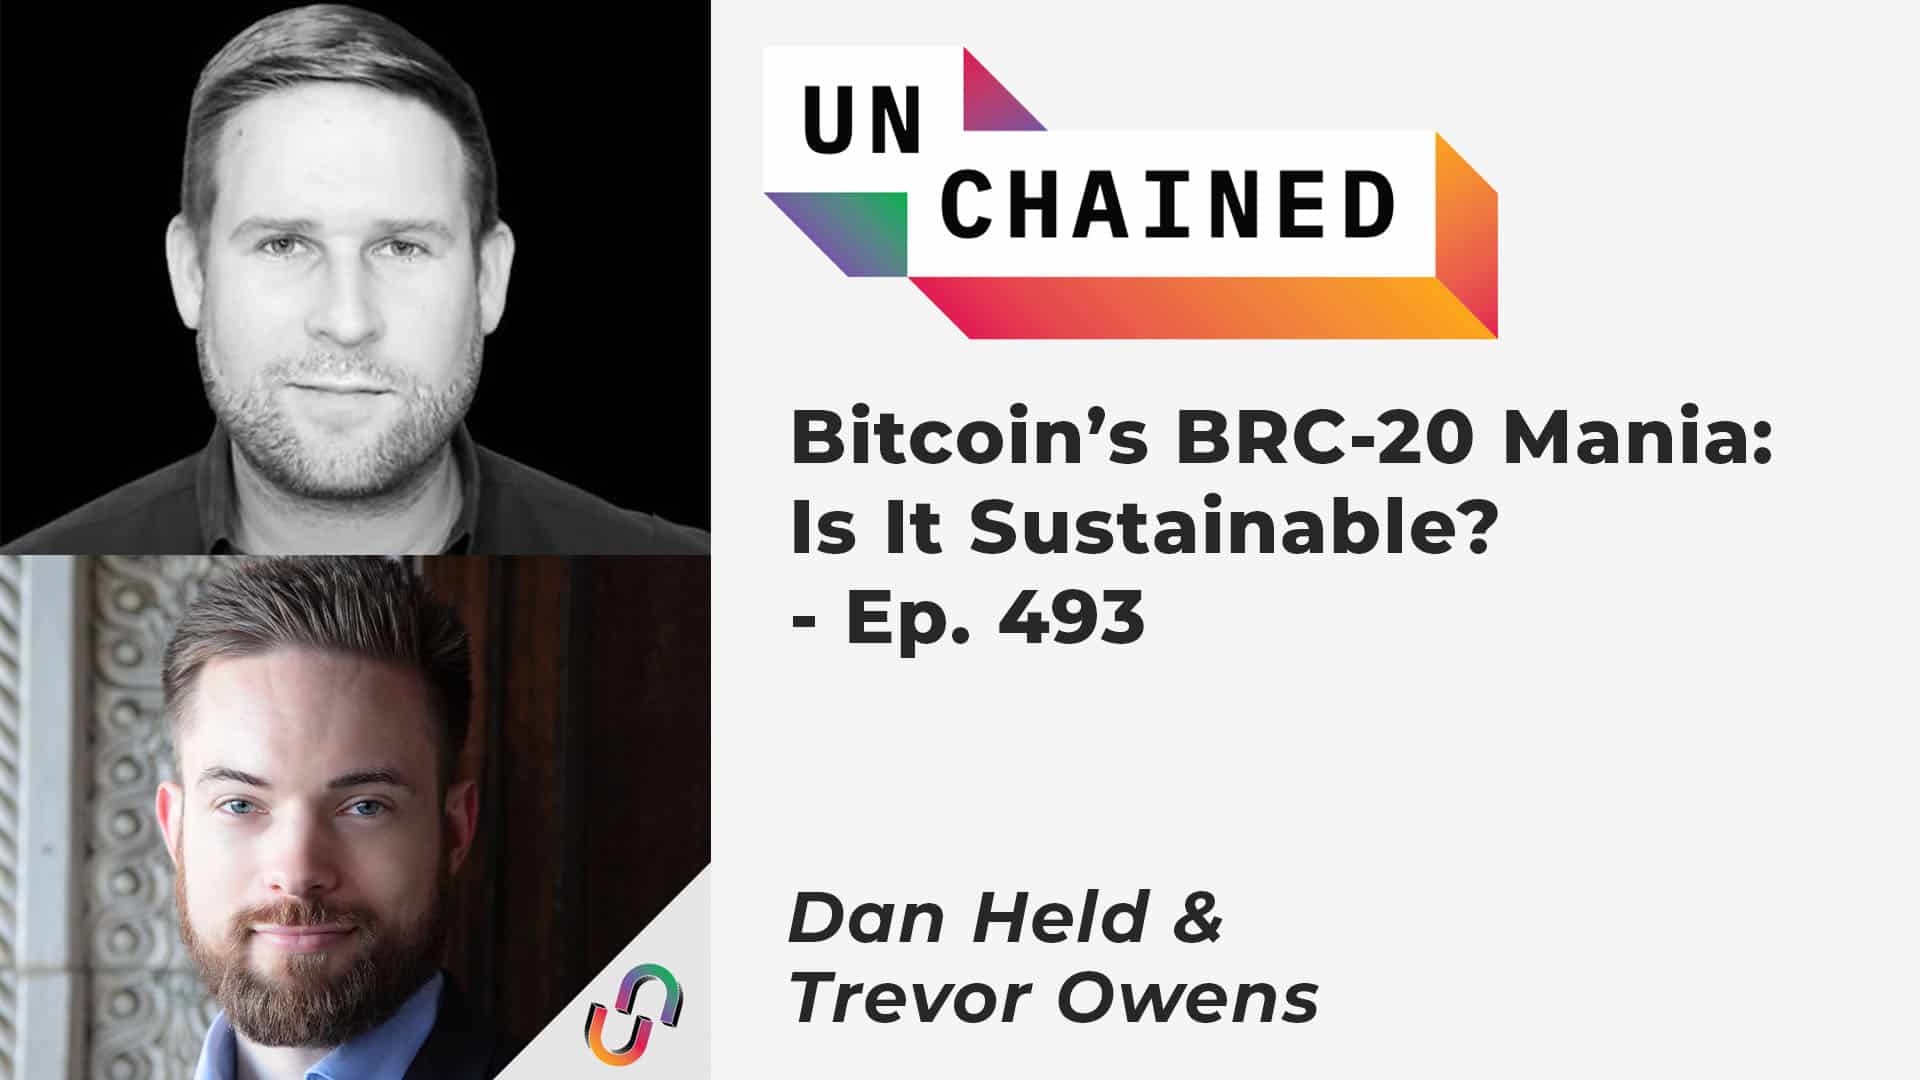 Bitcoin’s BRC-20 Mania: Is It Sustainable? - Ep. 493